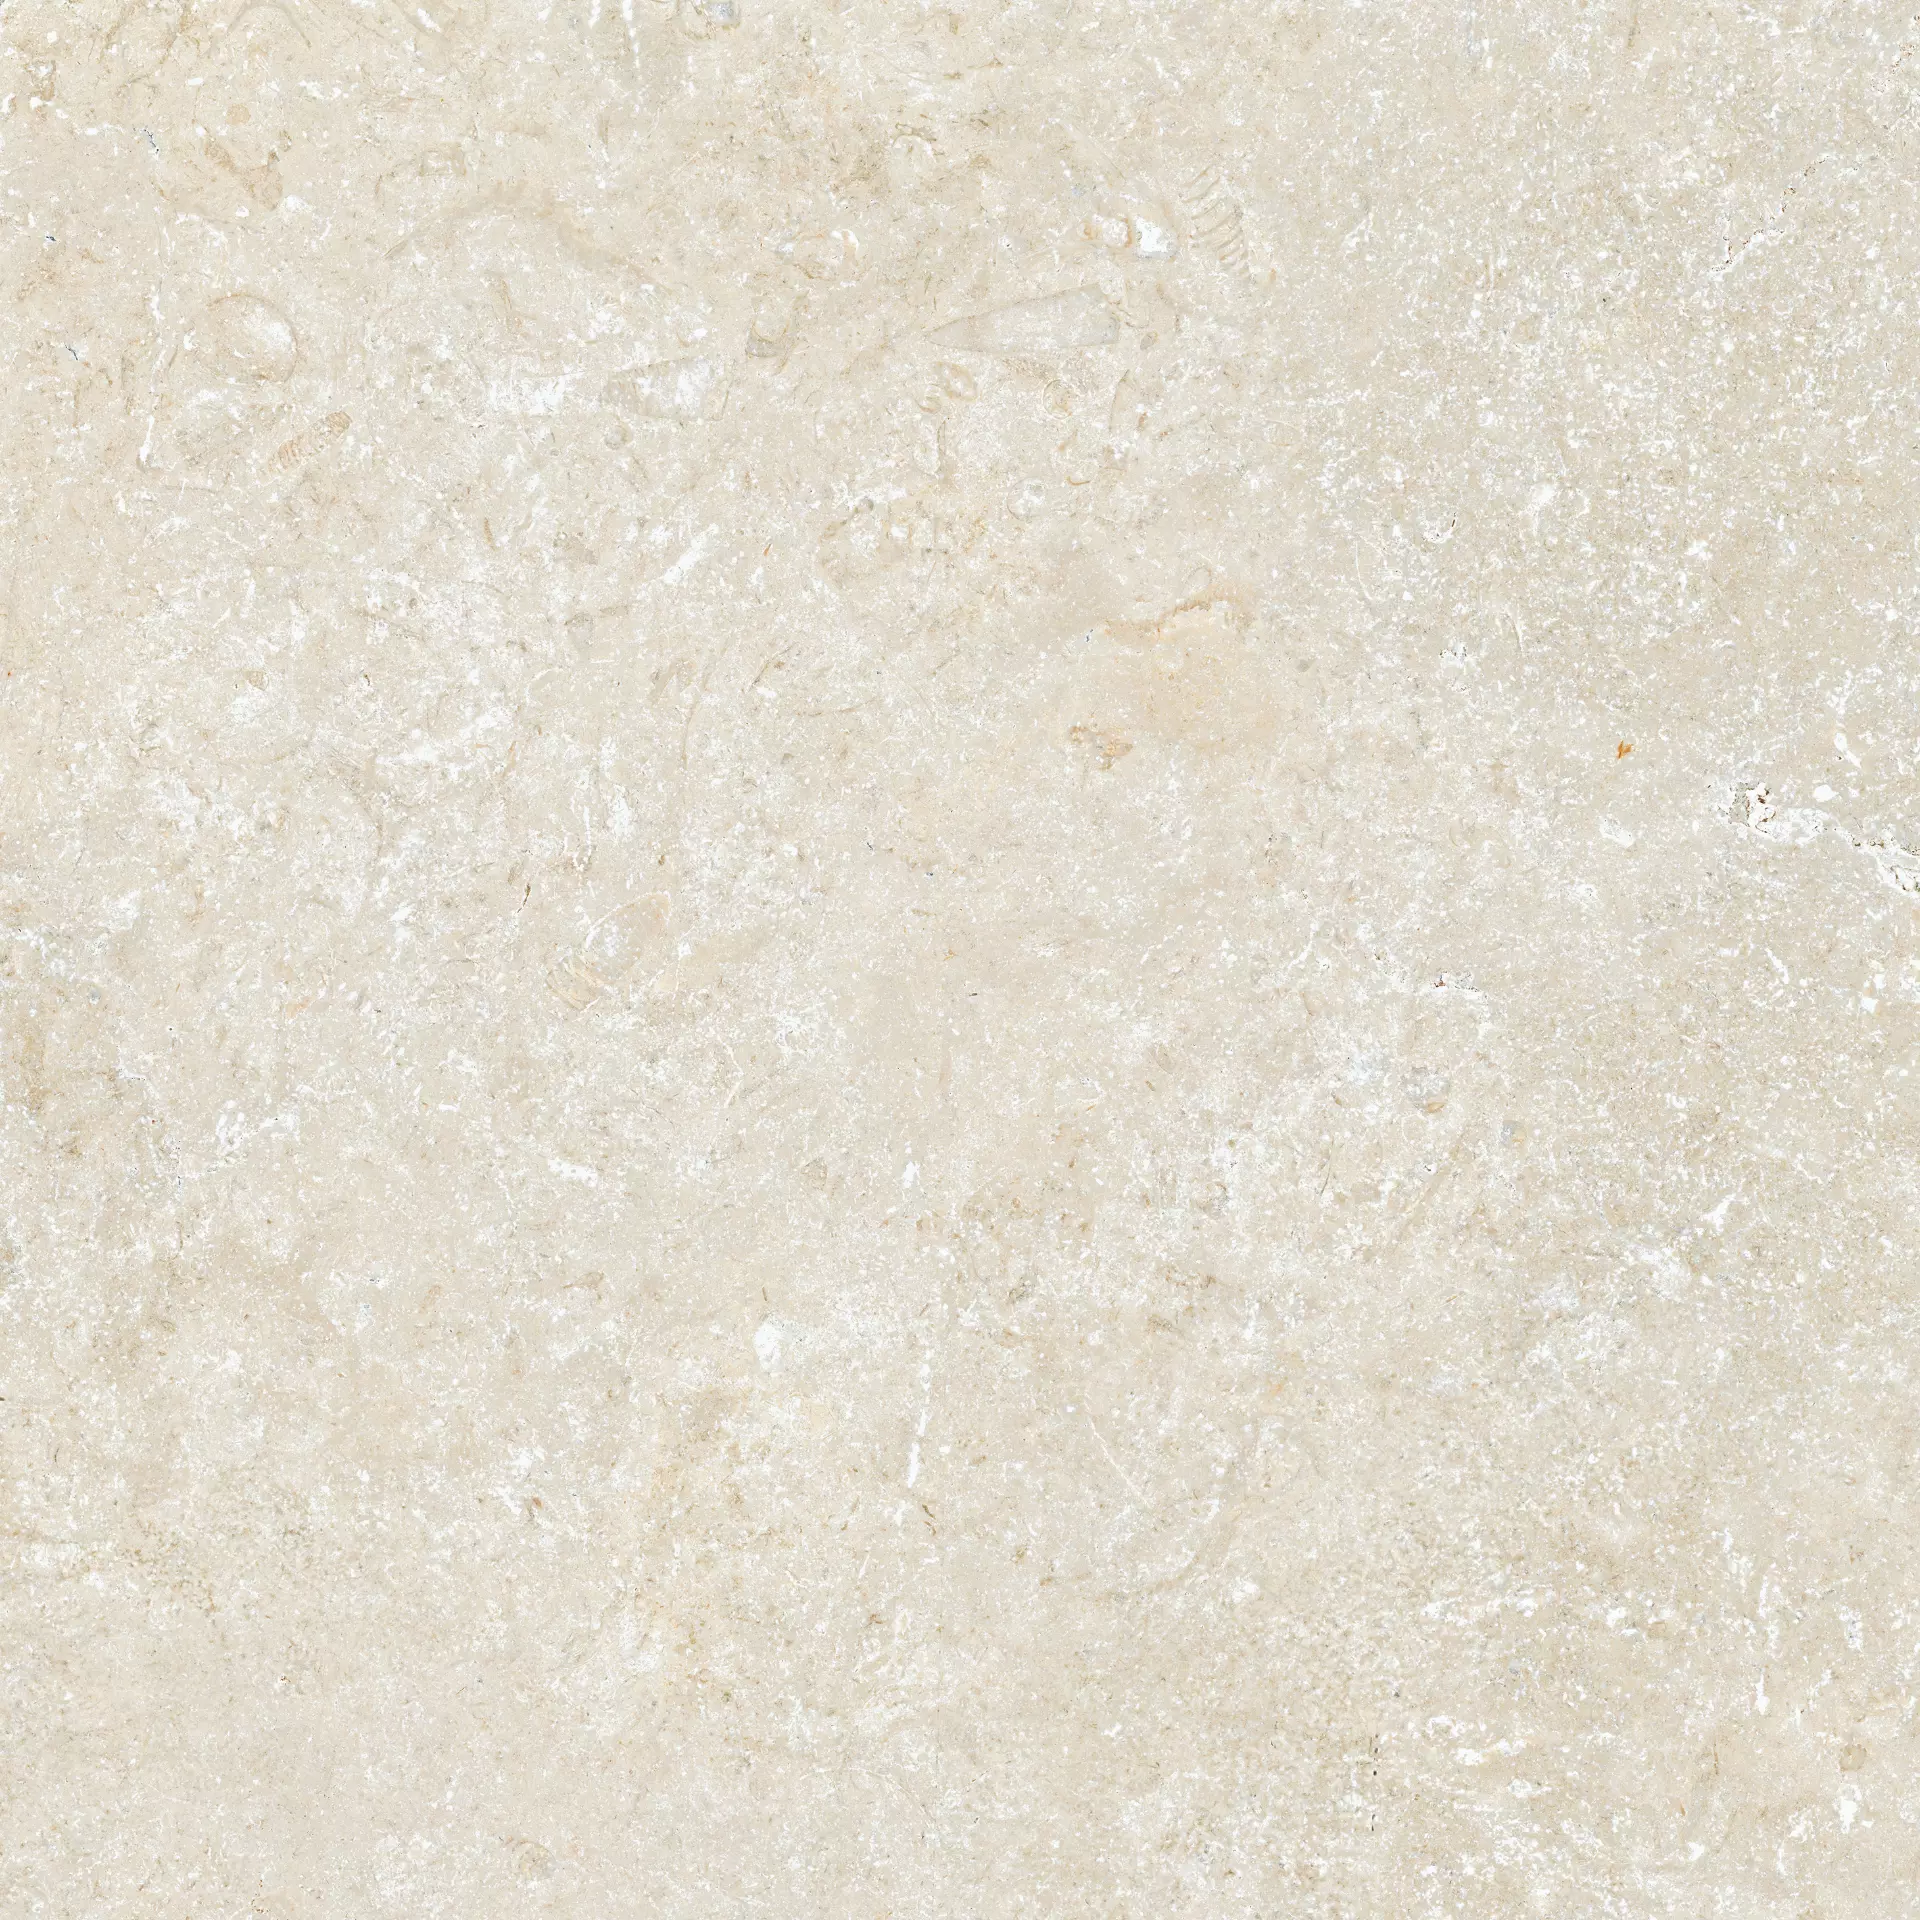 Cottodeste Secret Stone Mystery White Naturale Protect EGGSS00 90x90cm rectified 14mm